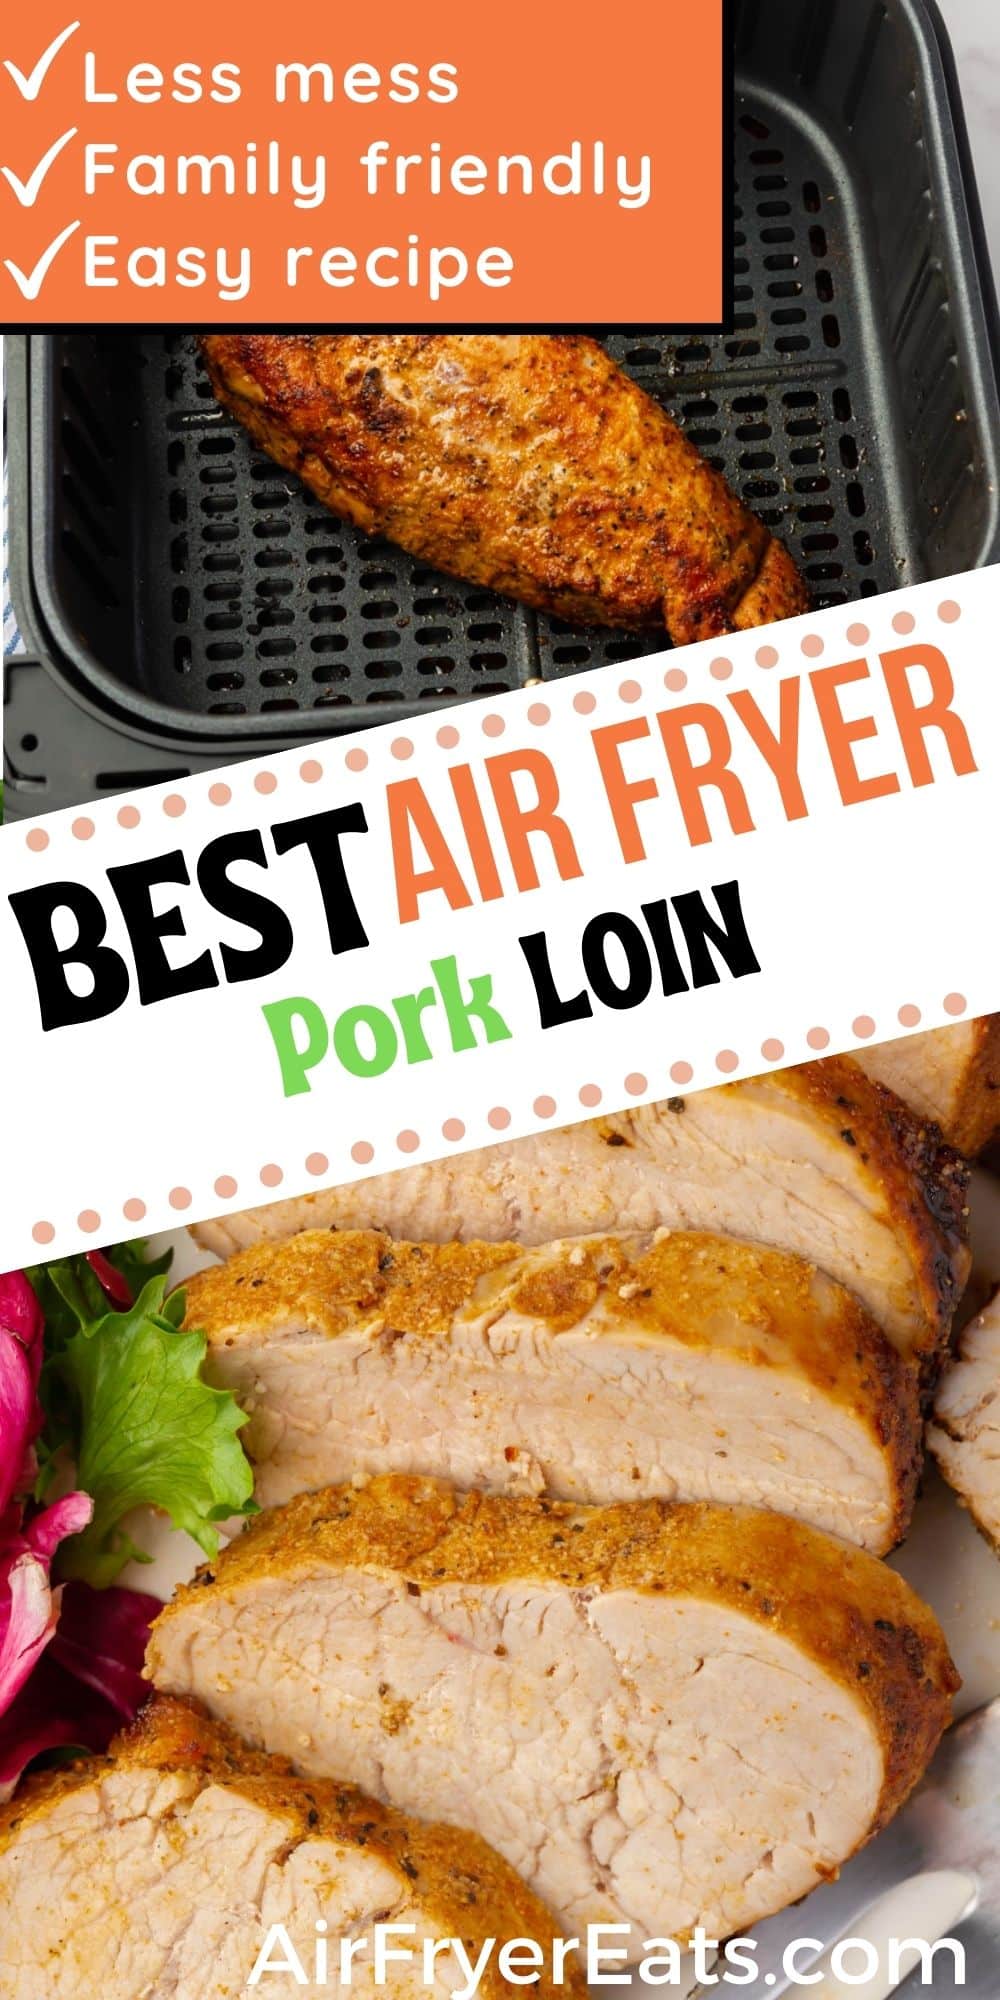 Cooking a pork loin is now even easier! My Air Fryer Pork Loin is tender, juicy, seasoned just right, and ready in just 20 minutes. via @vegetarianmamma